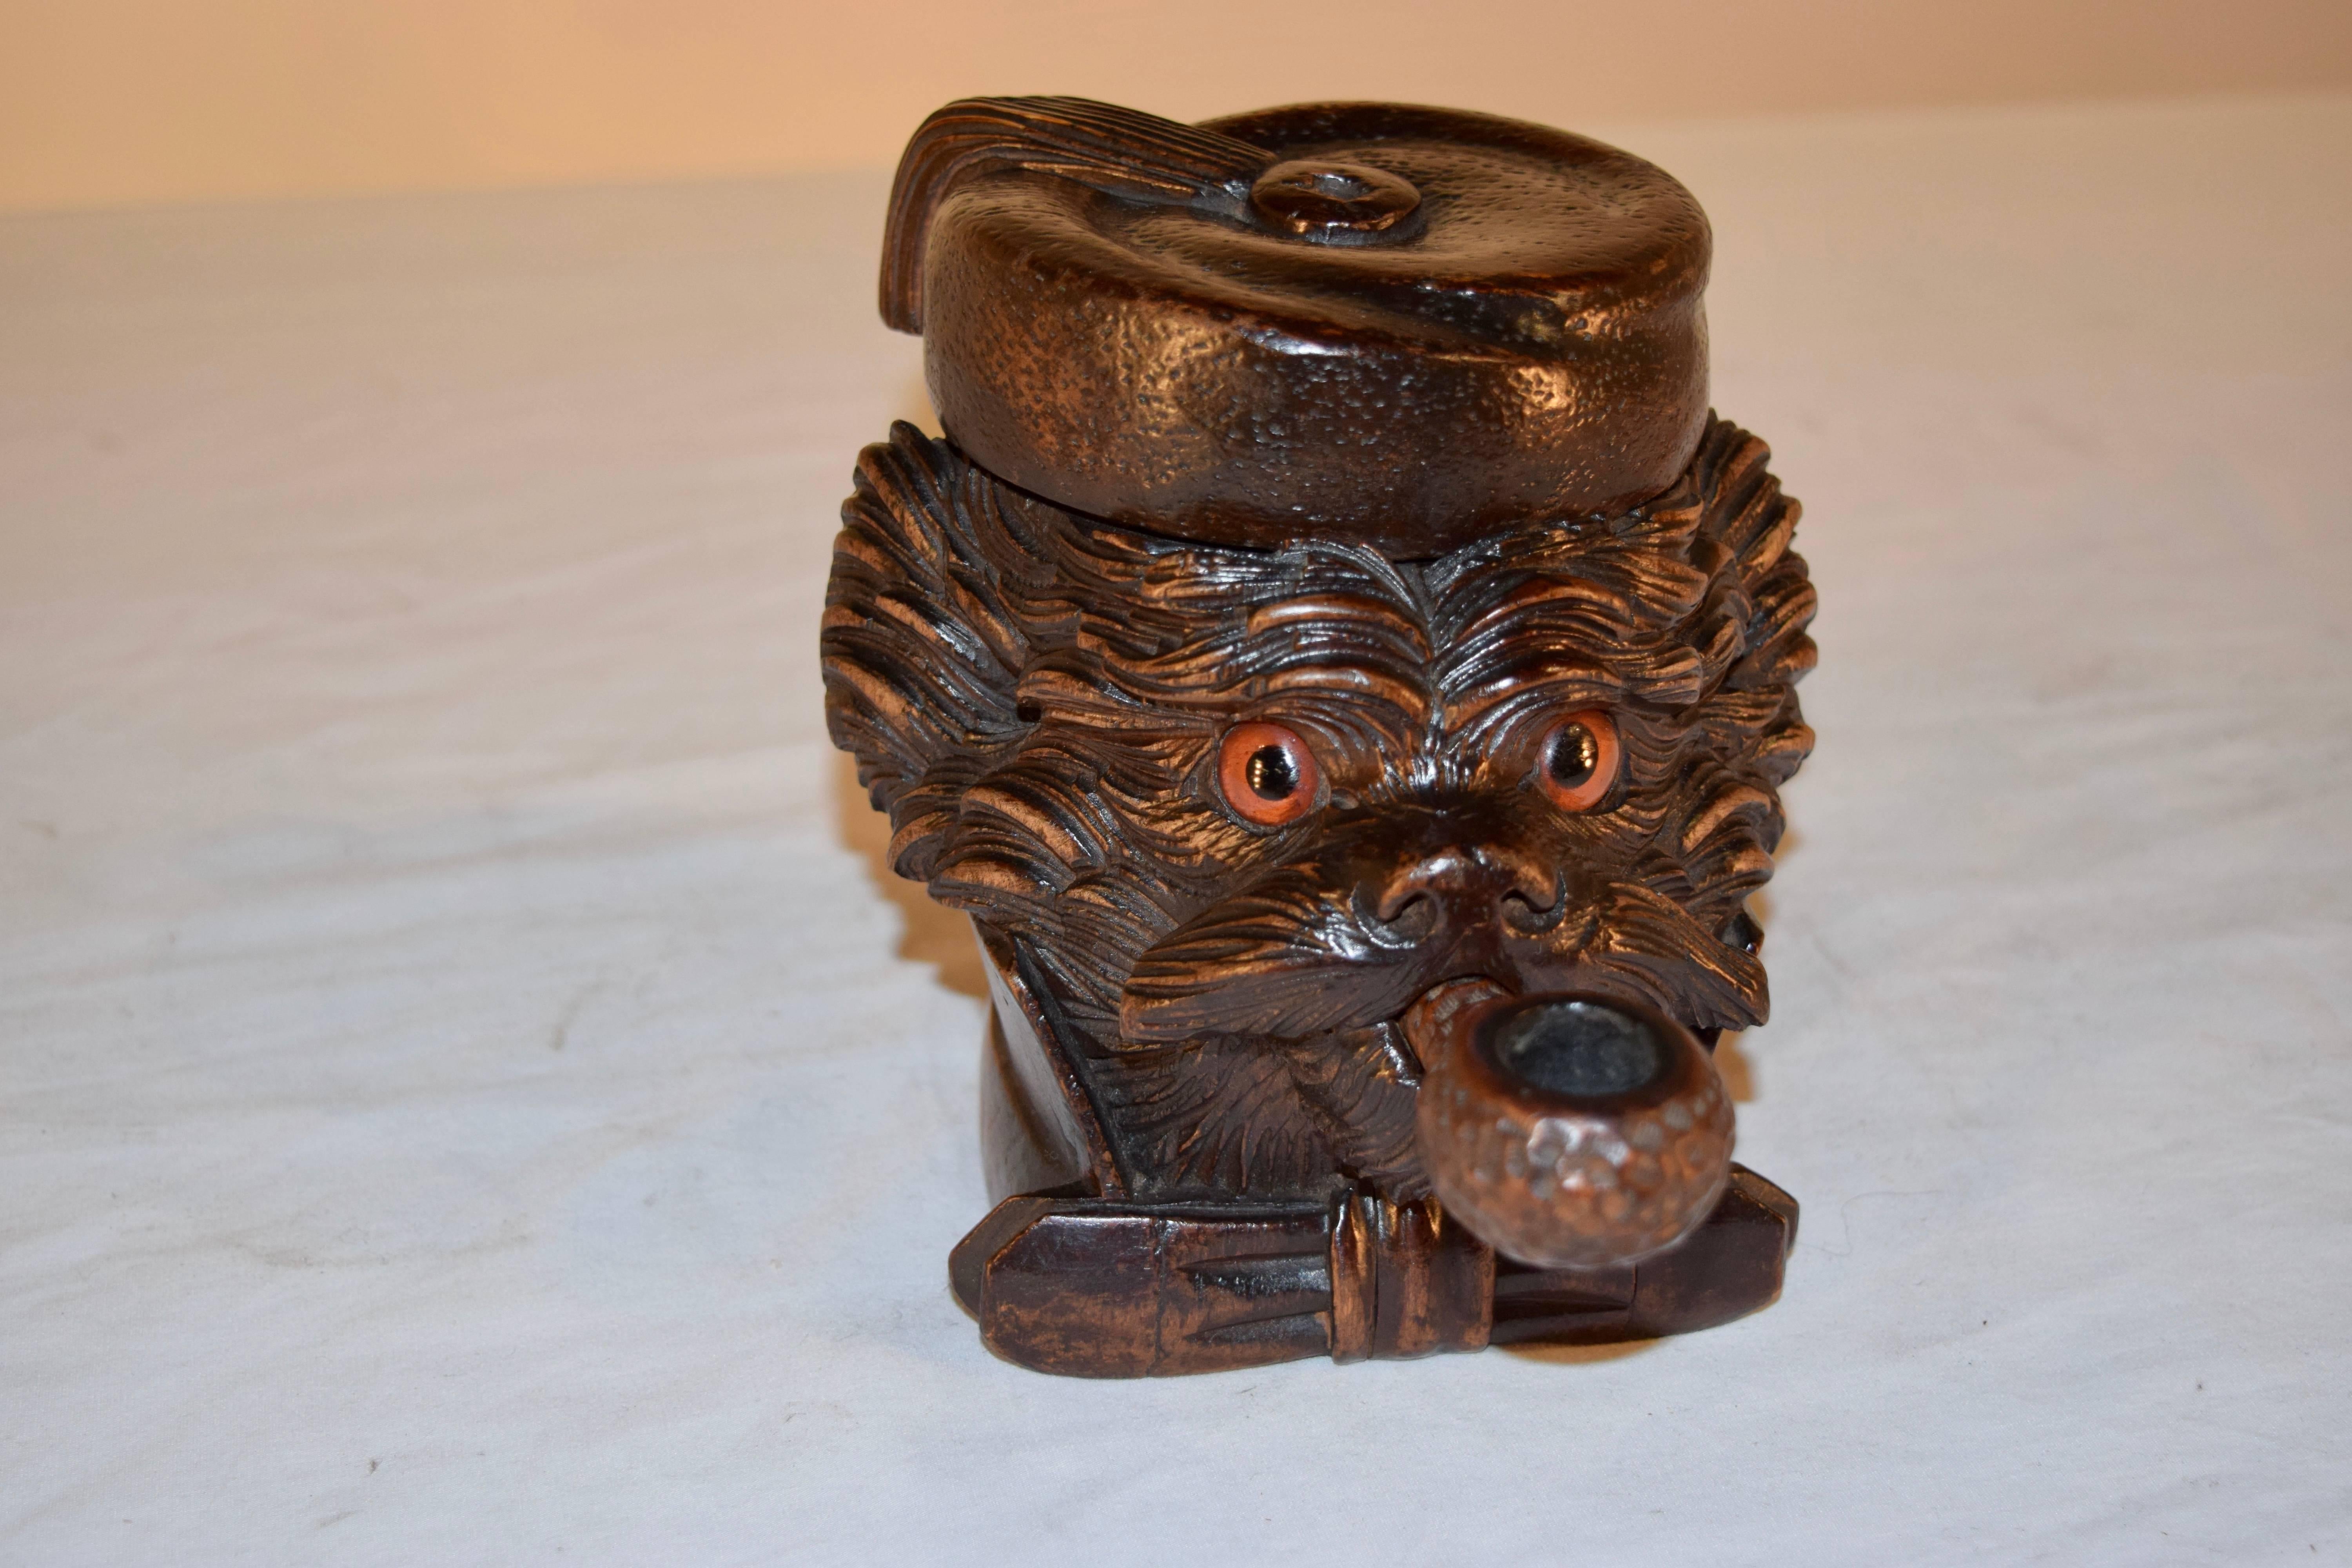 19th century hand-carved Black Forest dog's head humidor. The dog is wearing a hat, which lifts to reveal a storage compartment for pipe tobacco. The pipe is removable as well. The carving is lovely on this piece.